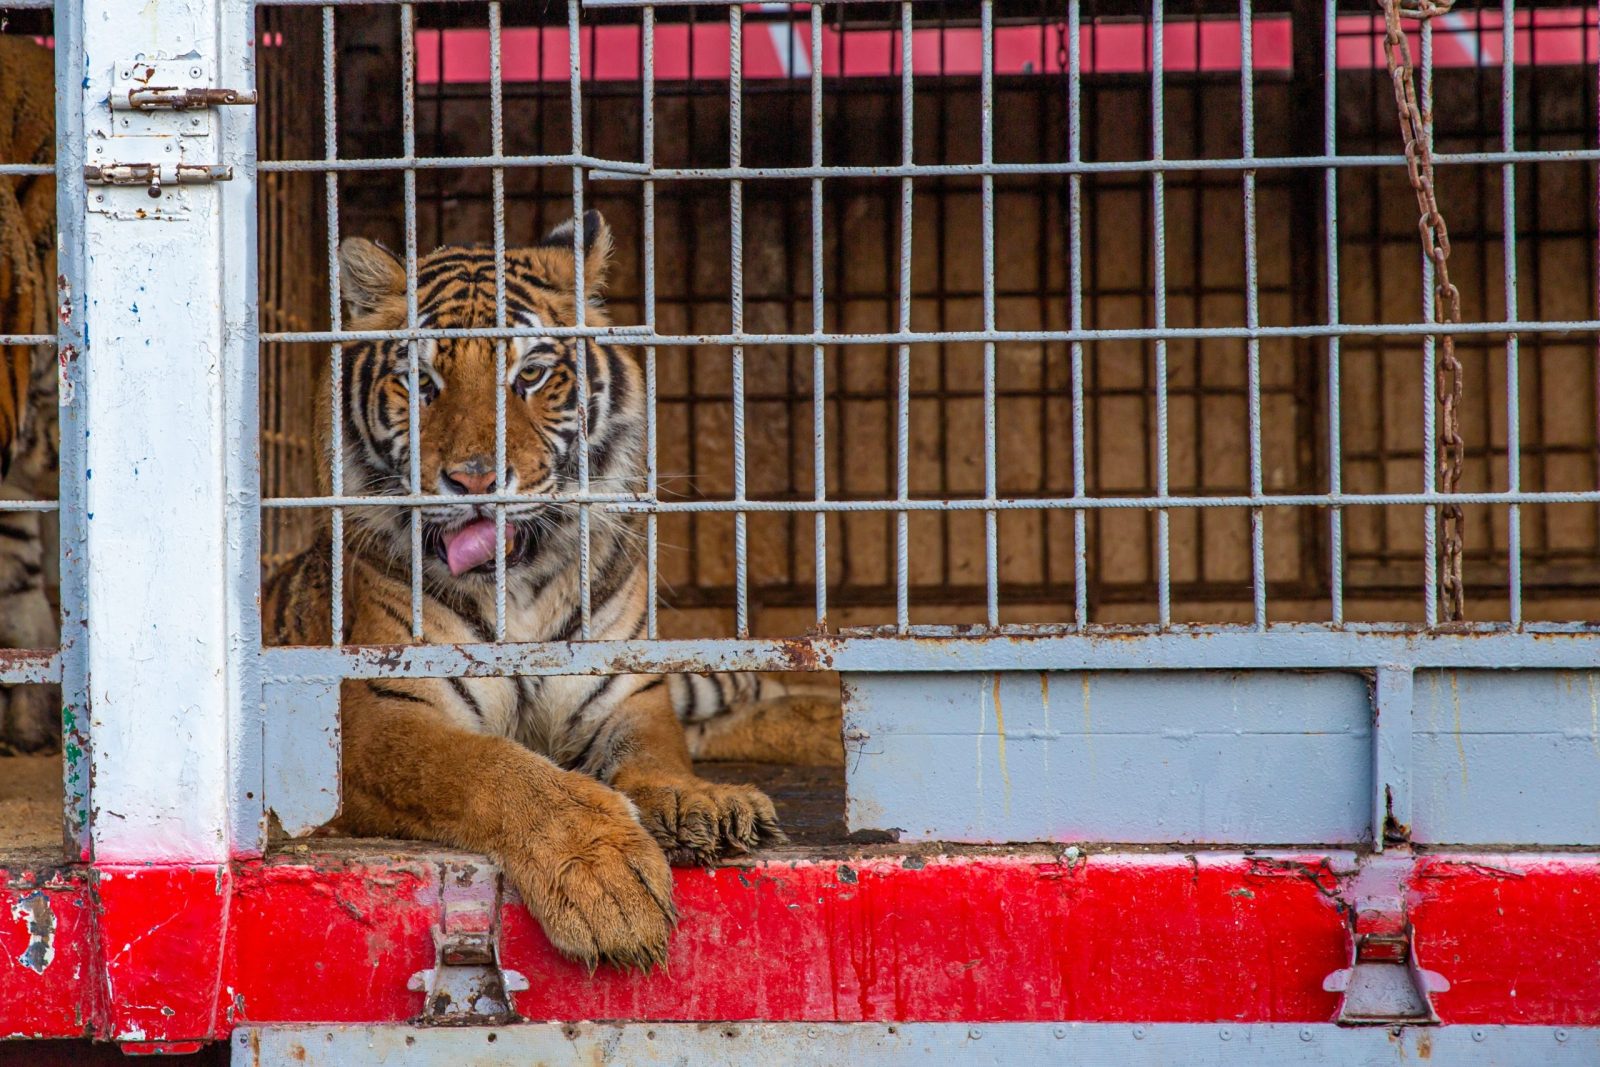 Tiger in a cage at a roadside zoo